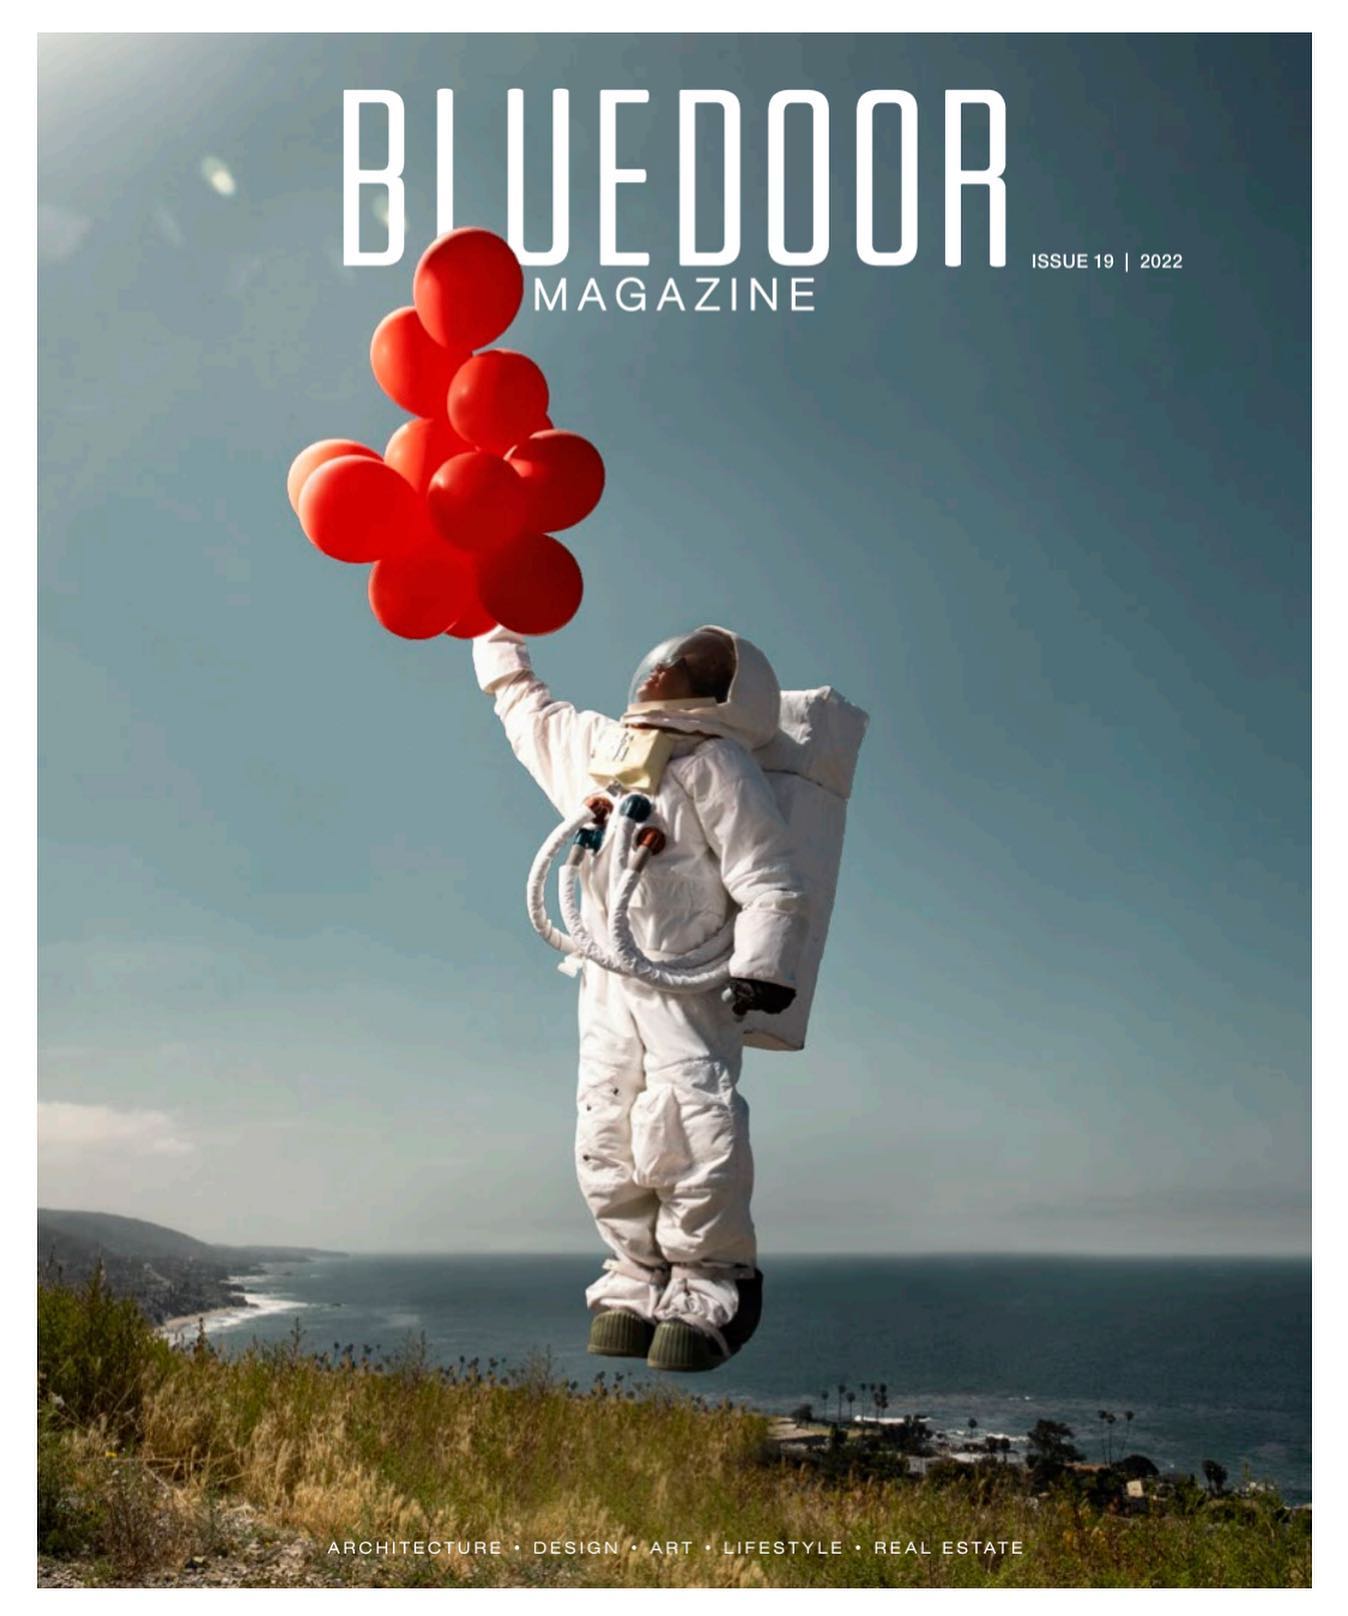 The new Blue Door Magazine has arrived. “The cover was inspired by a photo session with our team at Mission San Juan Capistrano,” says photographer Brett Hillyard. “While shooting at the Mission, that word mission stayed with me, and my brain envisioned an astronaut. It took some convincing, but I was committed to what I thought was a crazy and cool concept. We visited a few sites for the shoot, and finally we ‘landed’ at the Dartmoor Trail overlooking the Laguna Beach coastline. Lauren Horn did an amazing job modeling the heavy NASA suit in 80-degree weather. All the hot yoga she does helped her train for this moment! My favorite Blue Door Magazine moments are unexpected, with a bit of whimsy. That’s why I love this cover.” Model Lauren Horn of San Clemente is an asset manager with Palm Communities and a private yoga instructor. Pick up your copy of Blue Door Magazine today! @bluedoormagazine @hilly.photographic.initiative  #bluedoormagazine #hillyphotographicinitiative #palmcommunities #onamission #orangecounty #coastalorangecounty